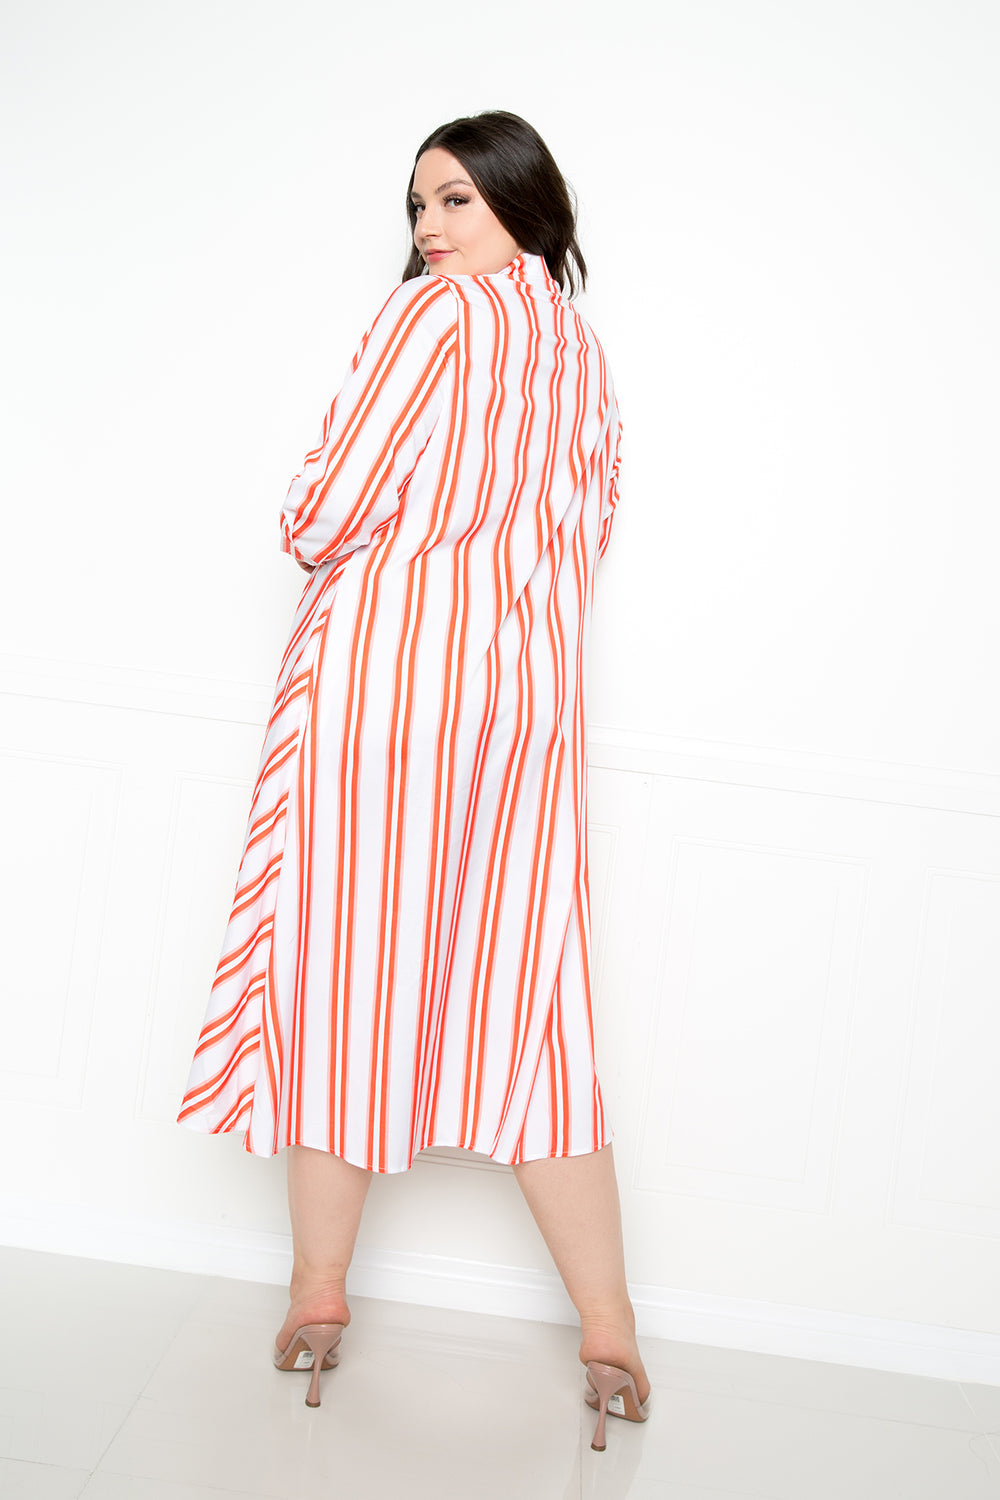 Buxom Couture Nothing To It Striped Shirt Dress in Orange Dresses RYSE Clothing Co.   